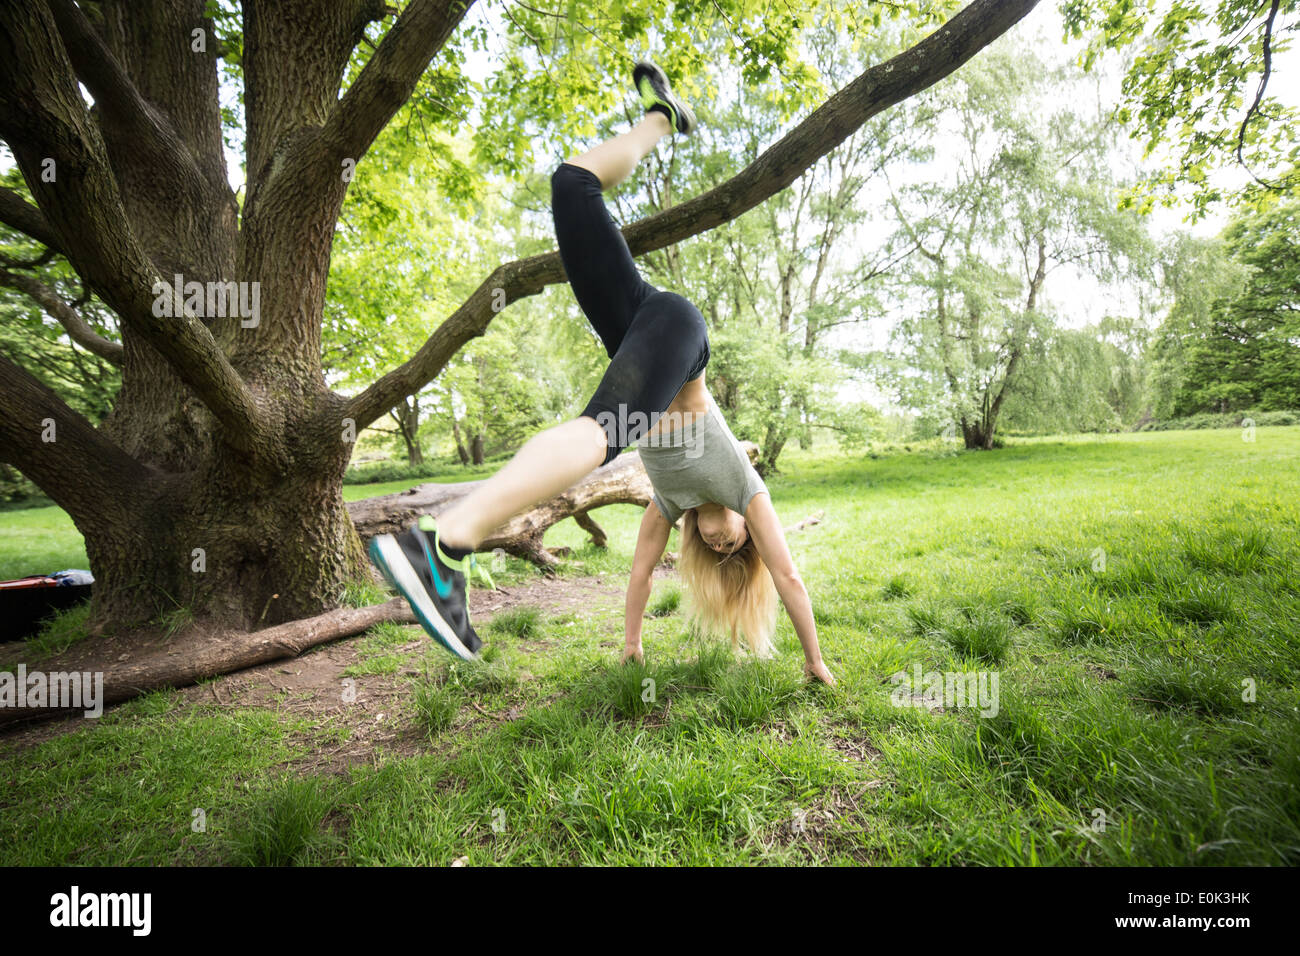 Blonde lady wearing black leggings and a grey crop exercising on hampstead heath. Stock Photo